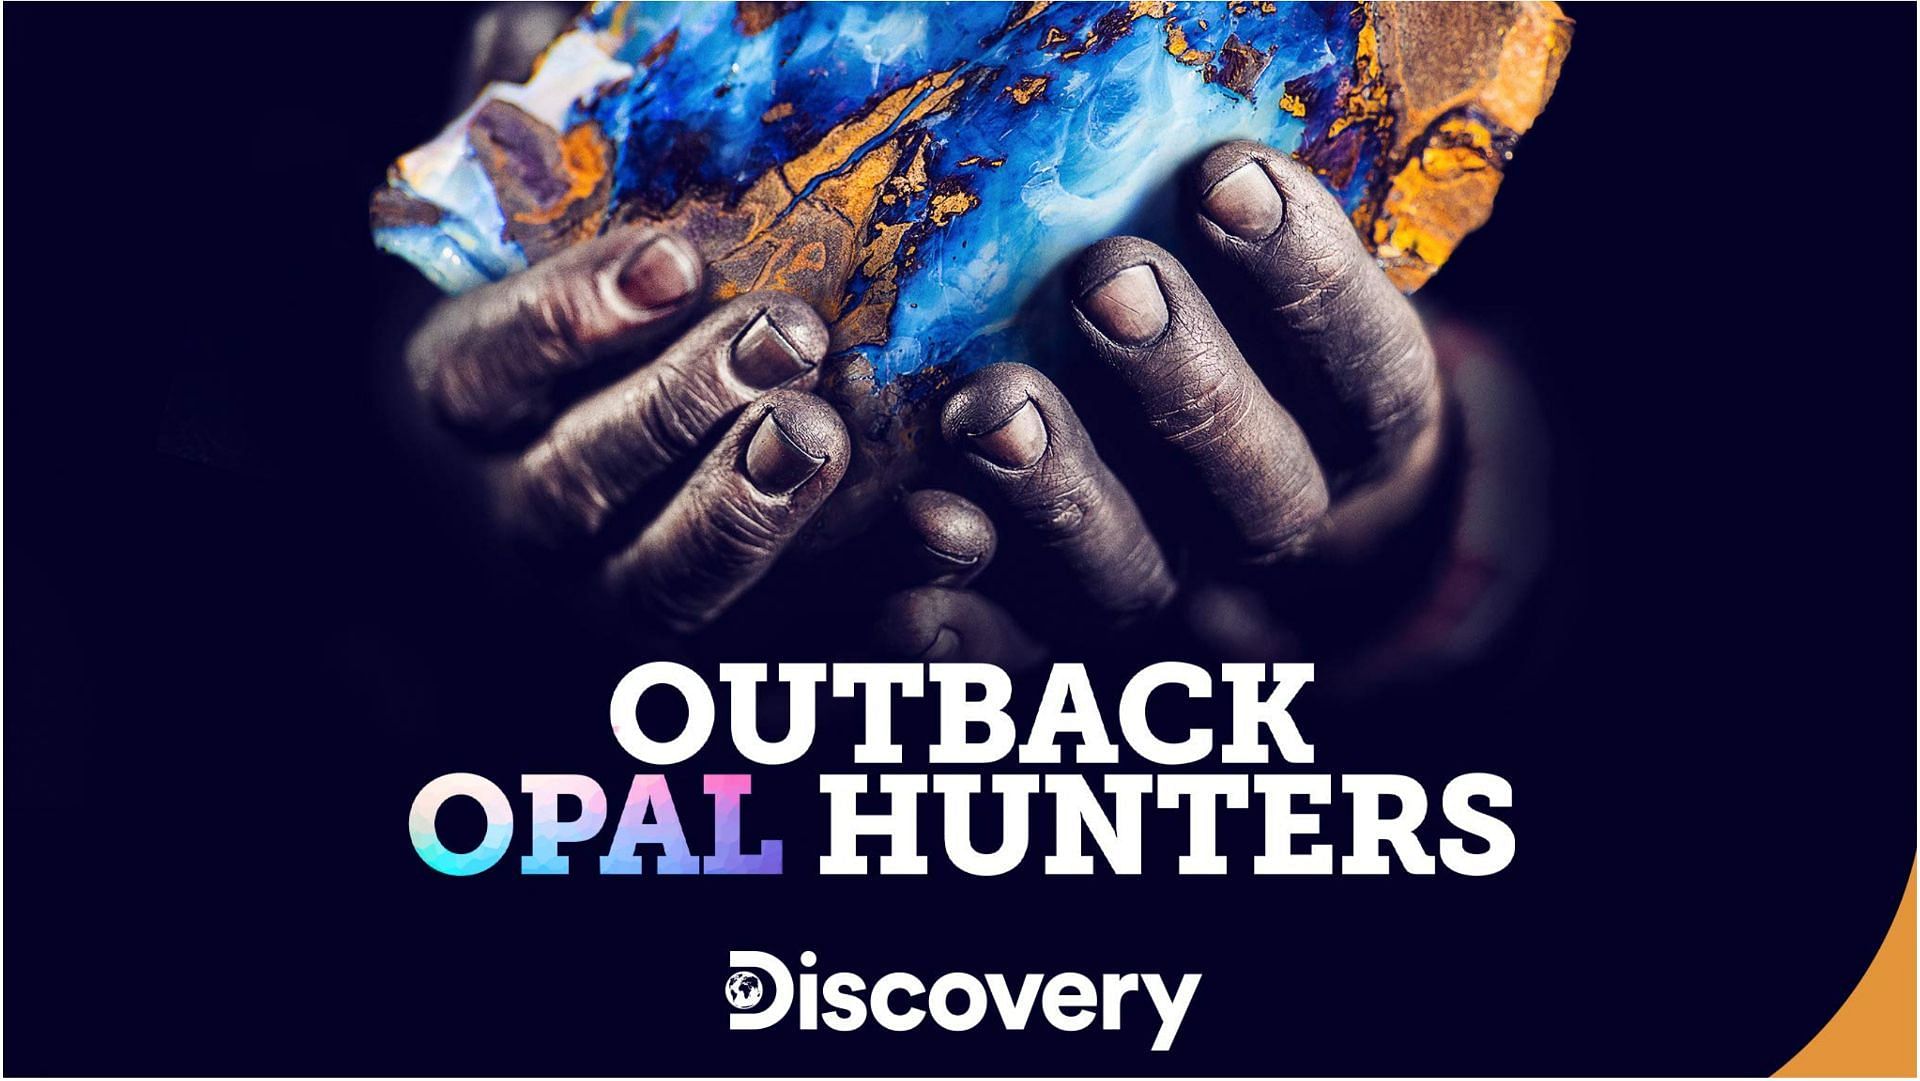 Ron Selig was known for his appearance on Outback Opal Hunters (Image via Amazon)